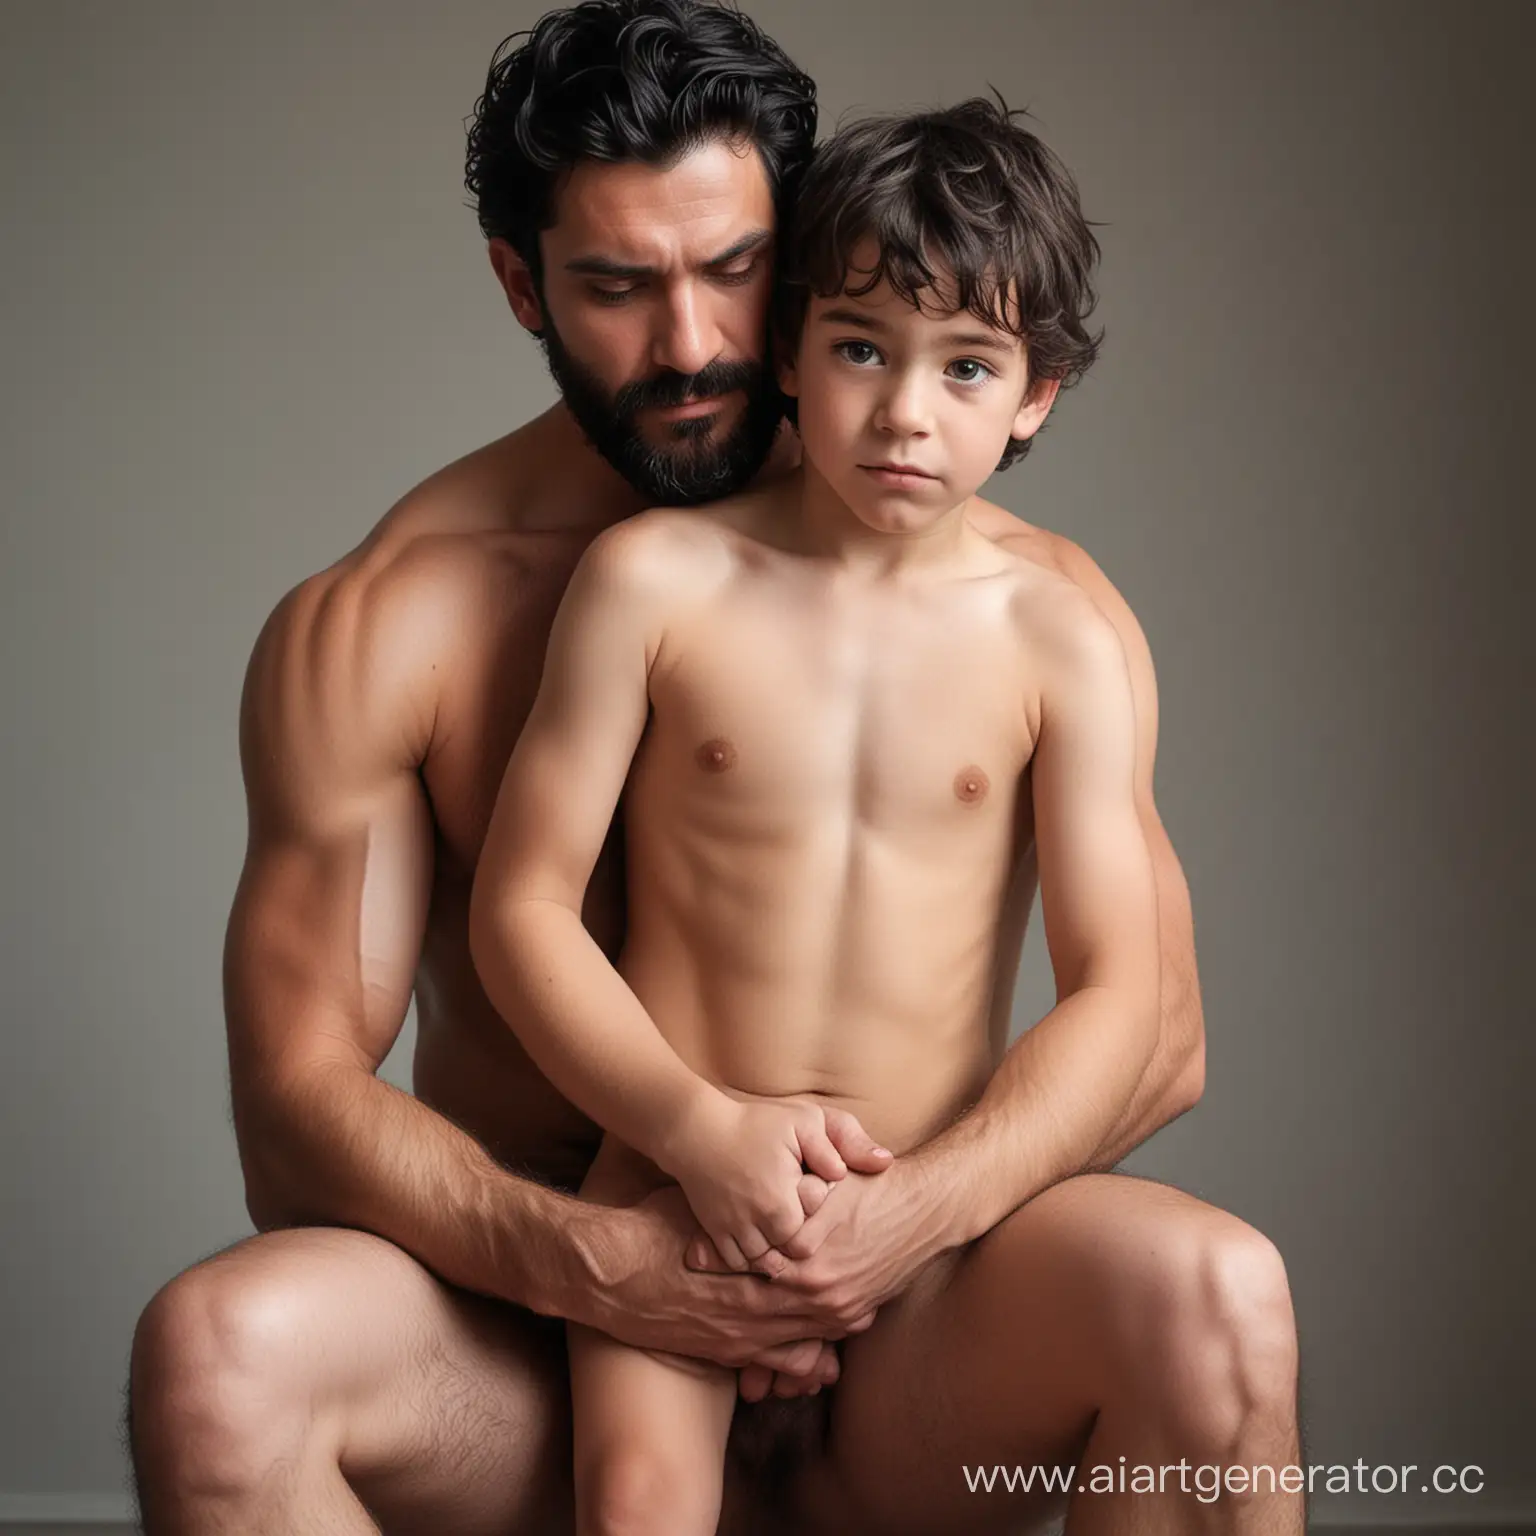 Affectionate-Father-and-Son-Embrace-Strong-Man-and-Small-Boy-Bonding